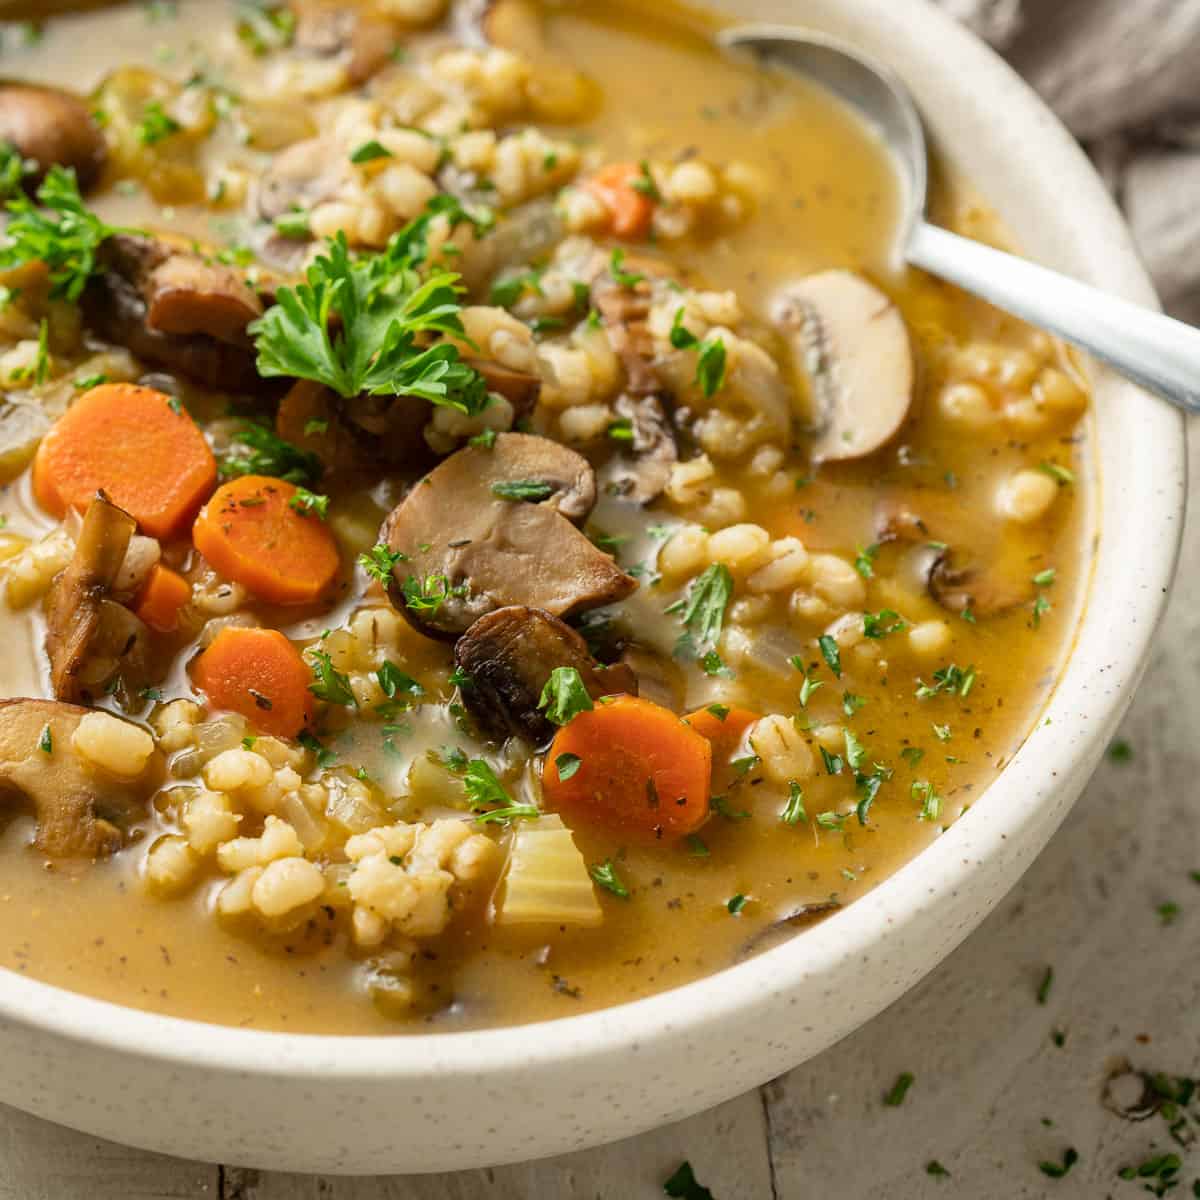 Spoon off the mushroom barley soup into a bowl.